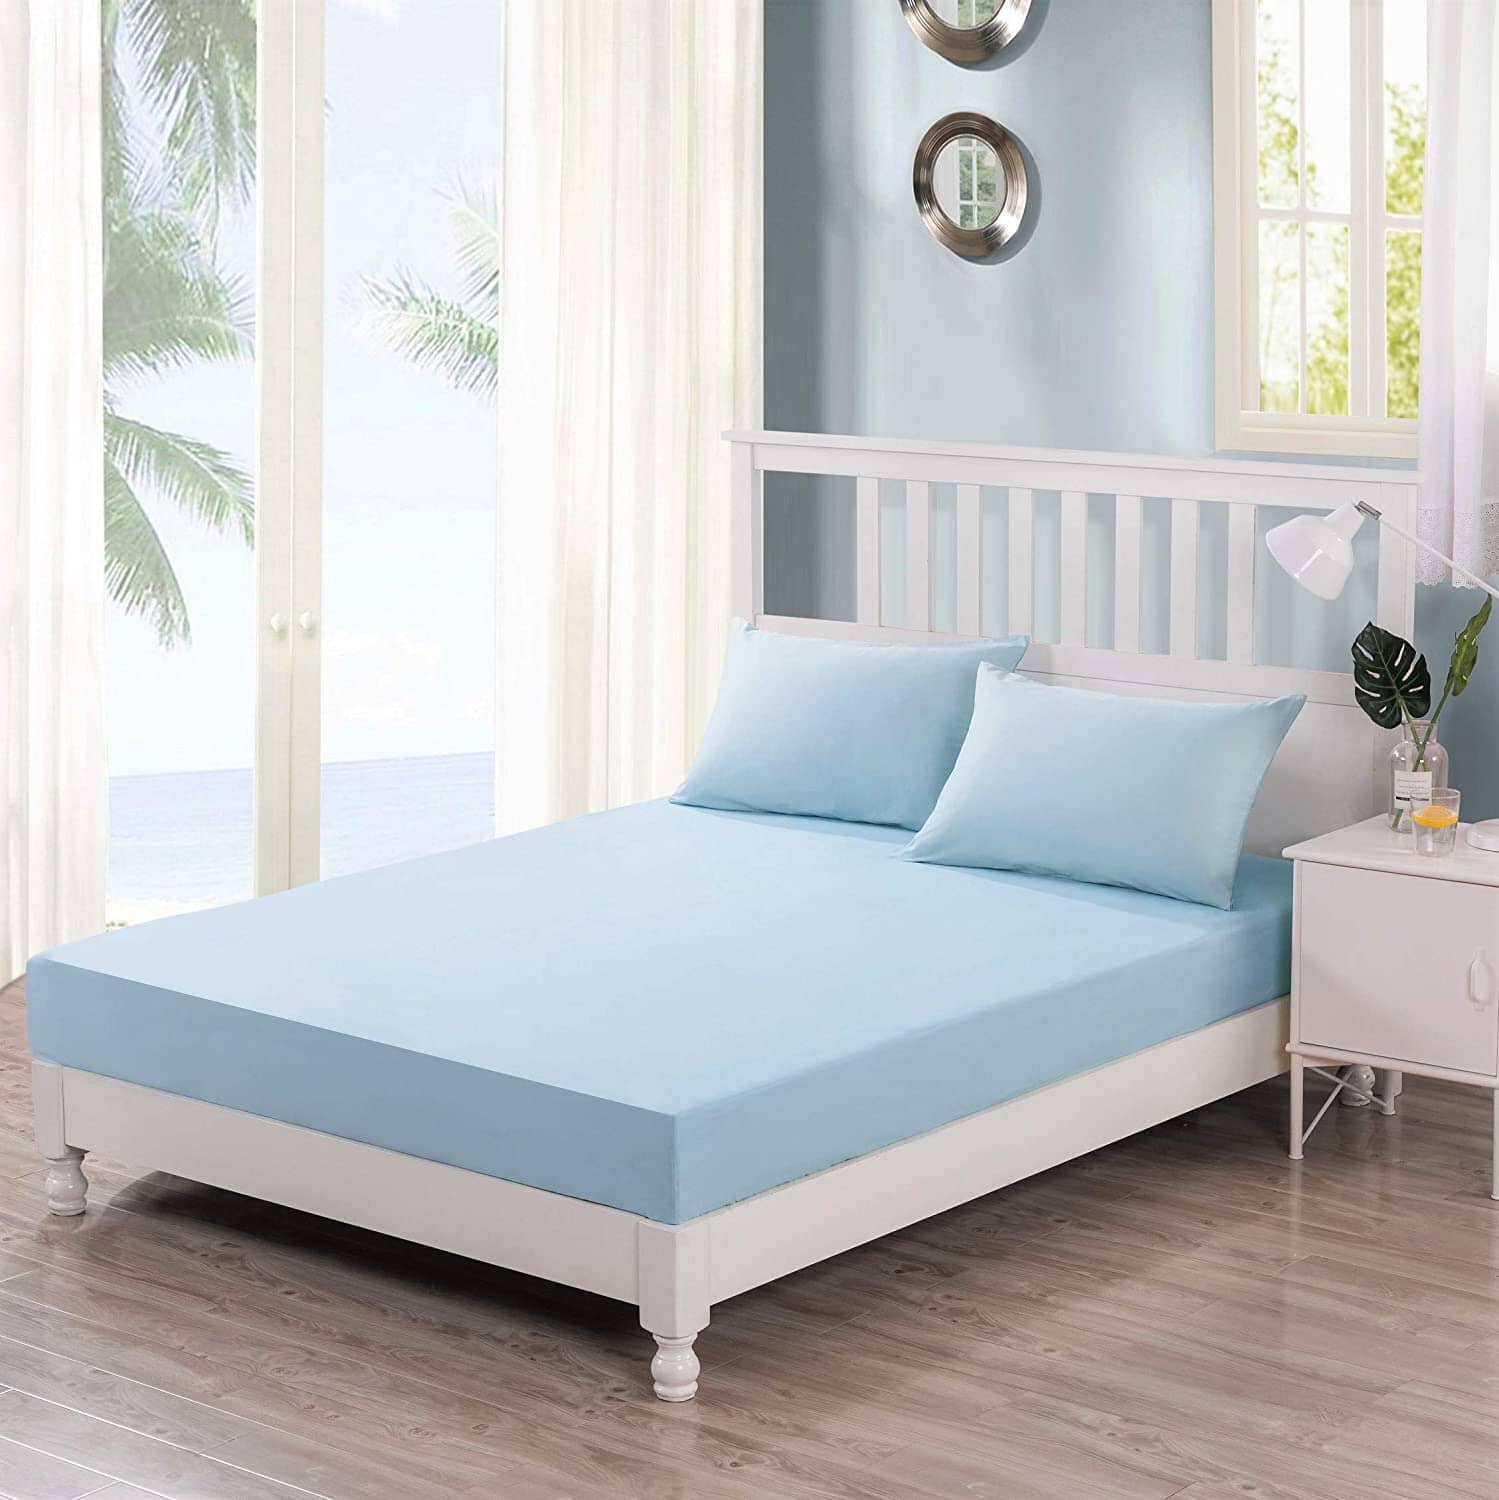 High-quality Light Blue Cotton Fitted Sheet and Pillowcase Set for ultimate comfort. 100% premium cotton construction, available in twin, full, queen, king, and California king sizes